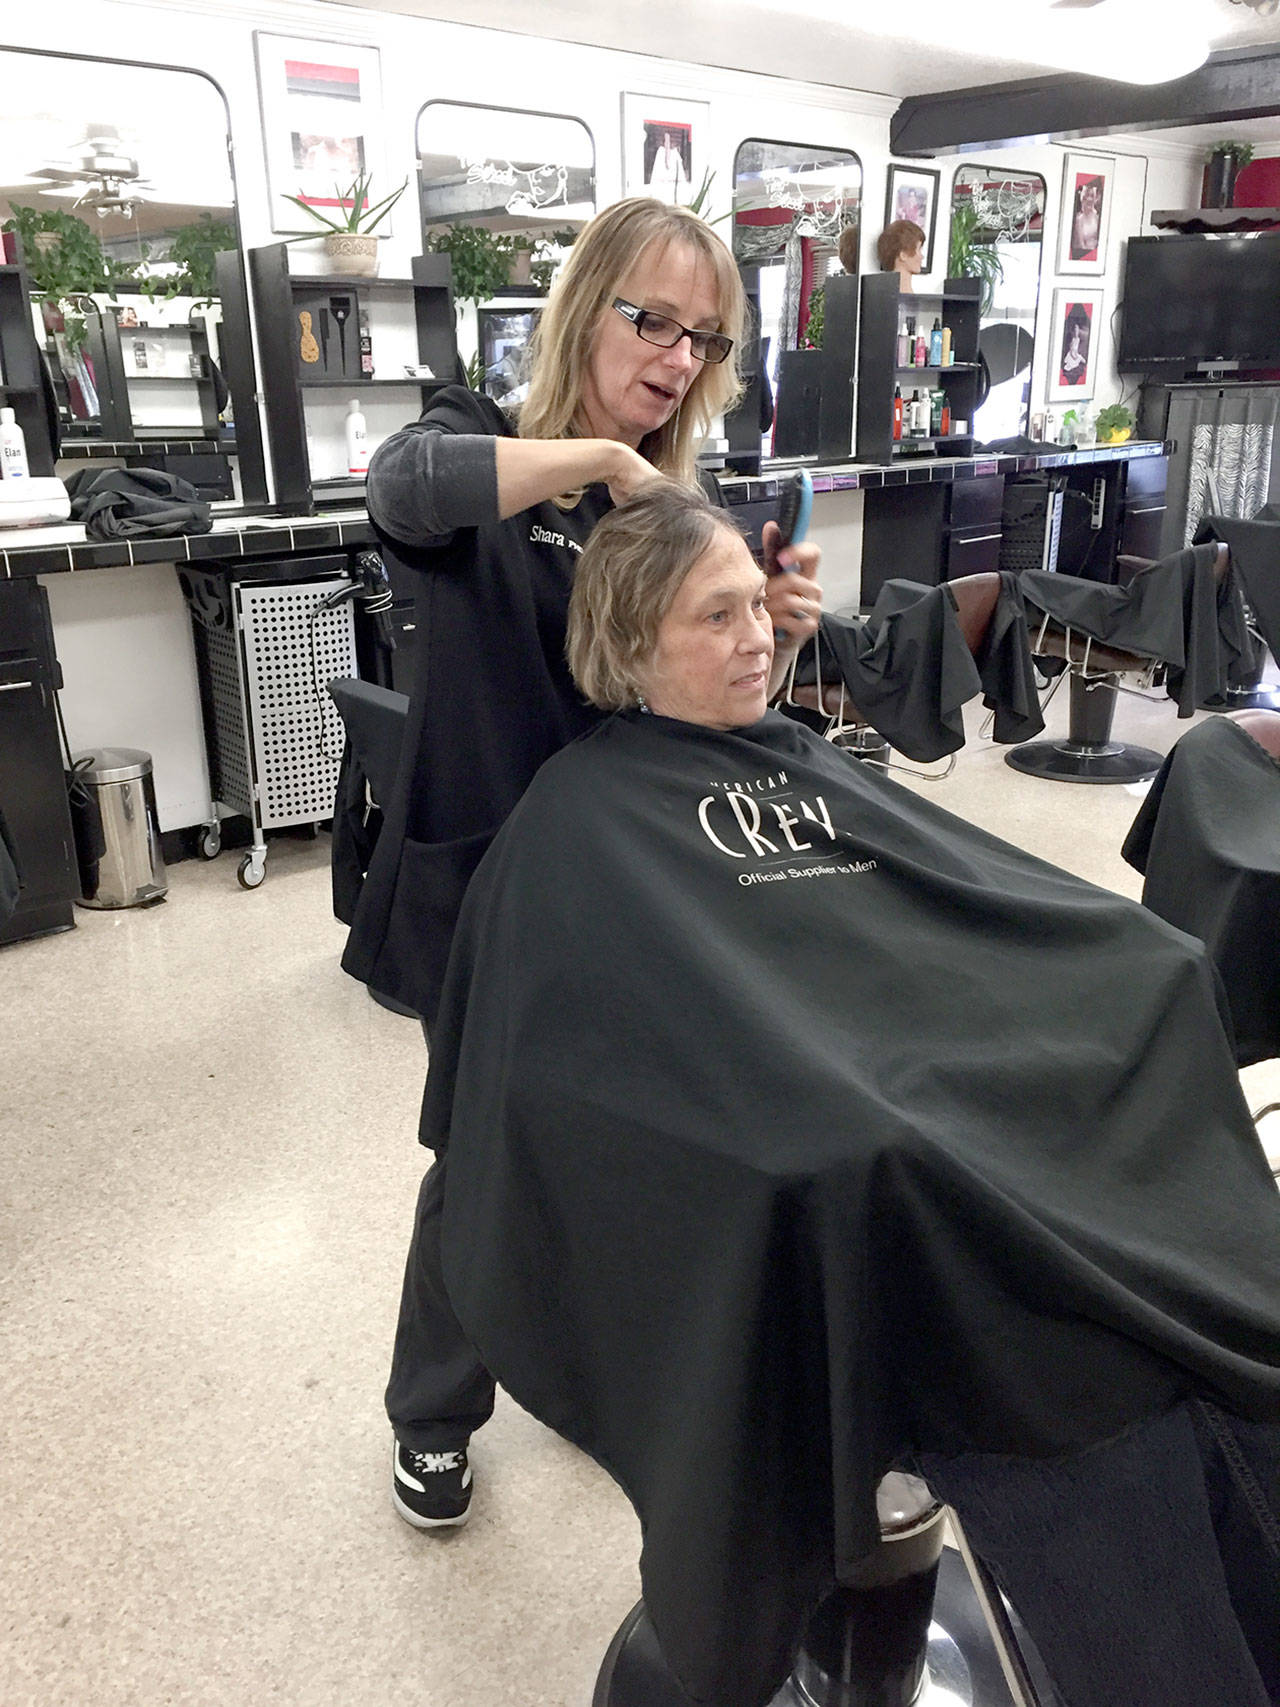 Shara Smith, owner of The Hair School in Port Angeles, talks with Dawn Saiz about the type of wig she’d like as part of an Olympic Medical Center and American Cancer Society program providing free wigs to women undergoing cancer treatment. (Fran Howell/for Peninsula Daily News)